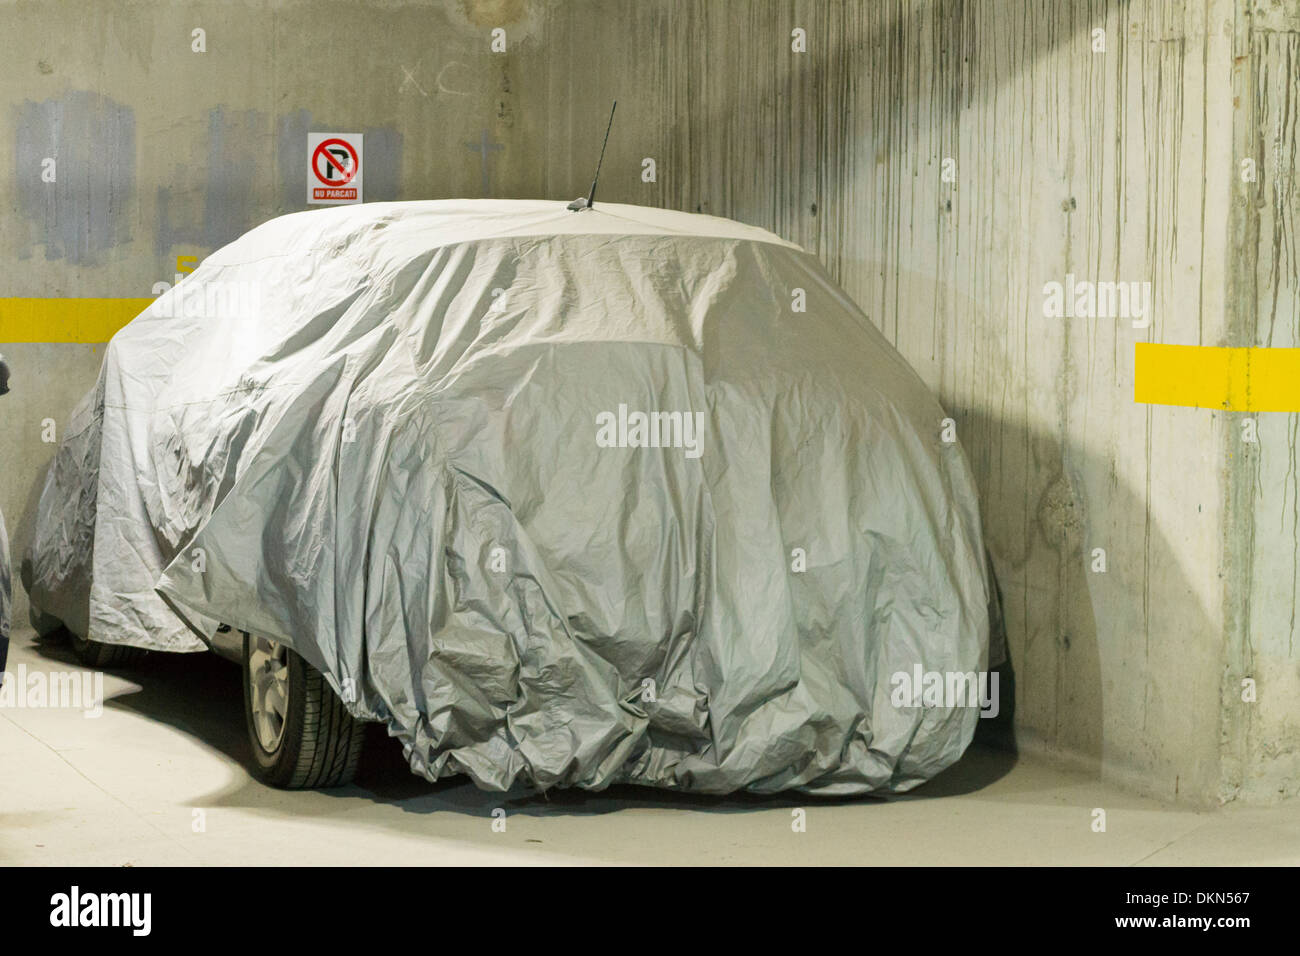 Car with cover sheet for sunlight, rain and dust protection in a parking lot Stock Photo